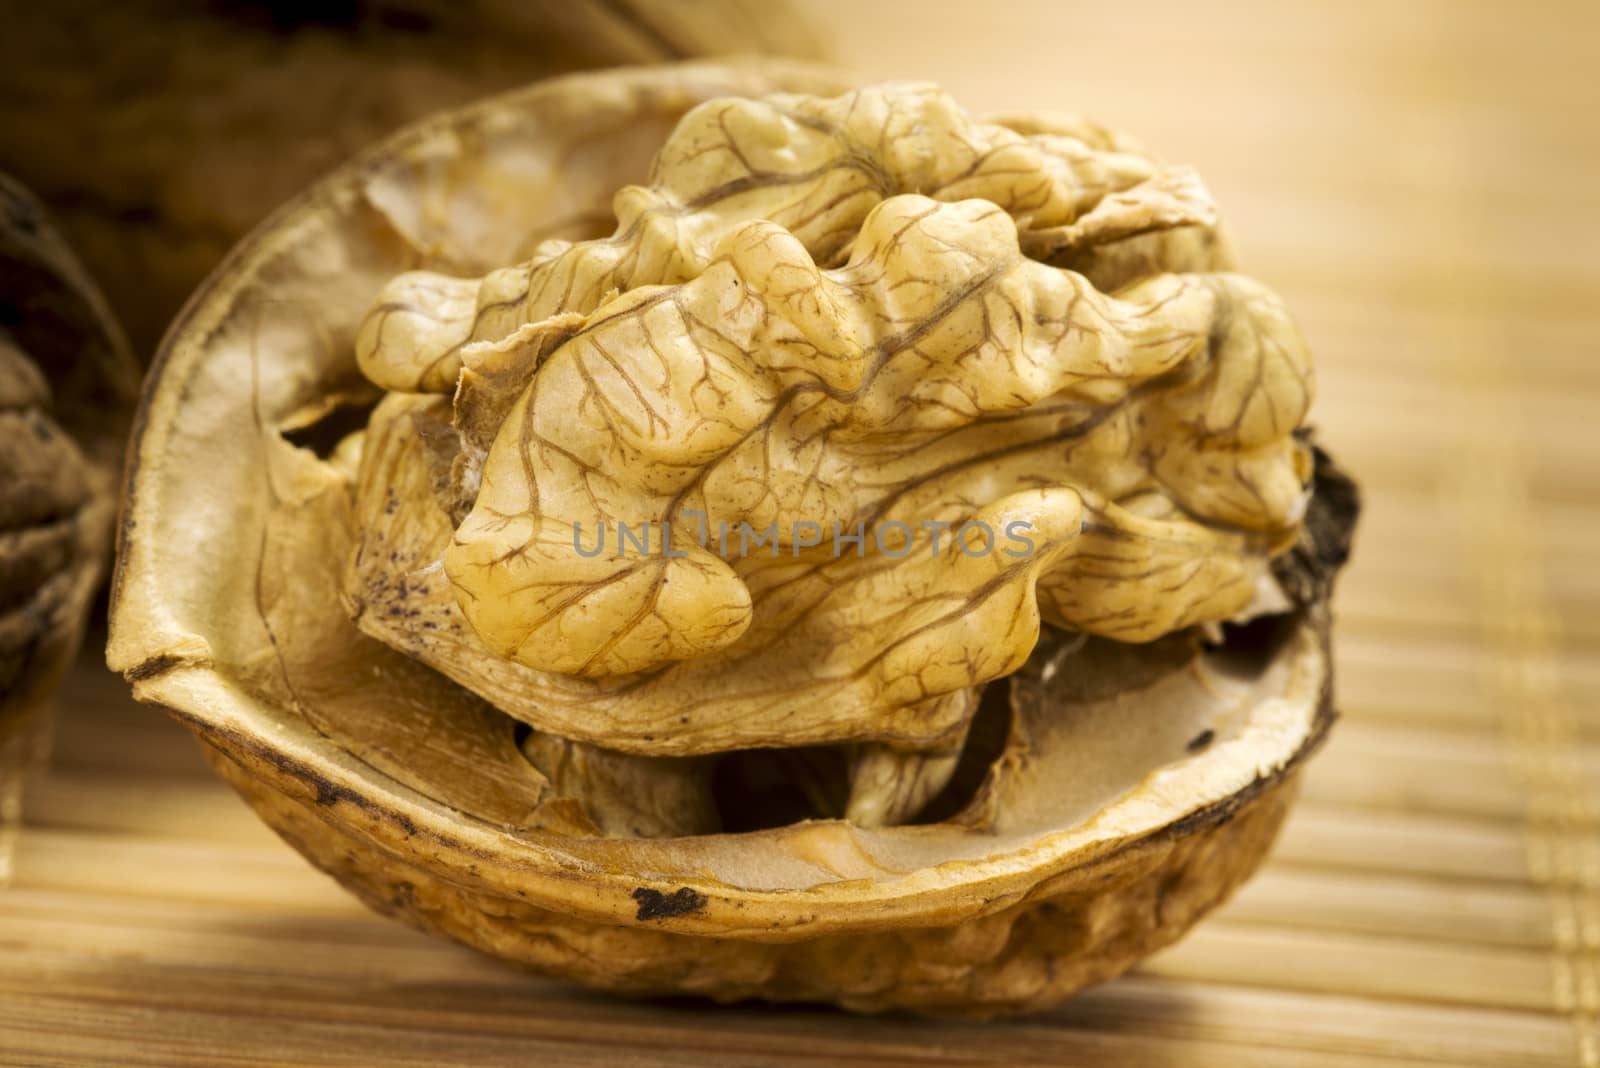 open cracked wallnut on brown bamboo background